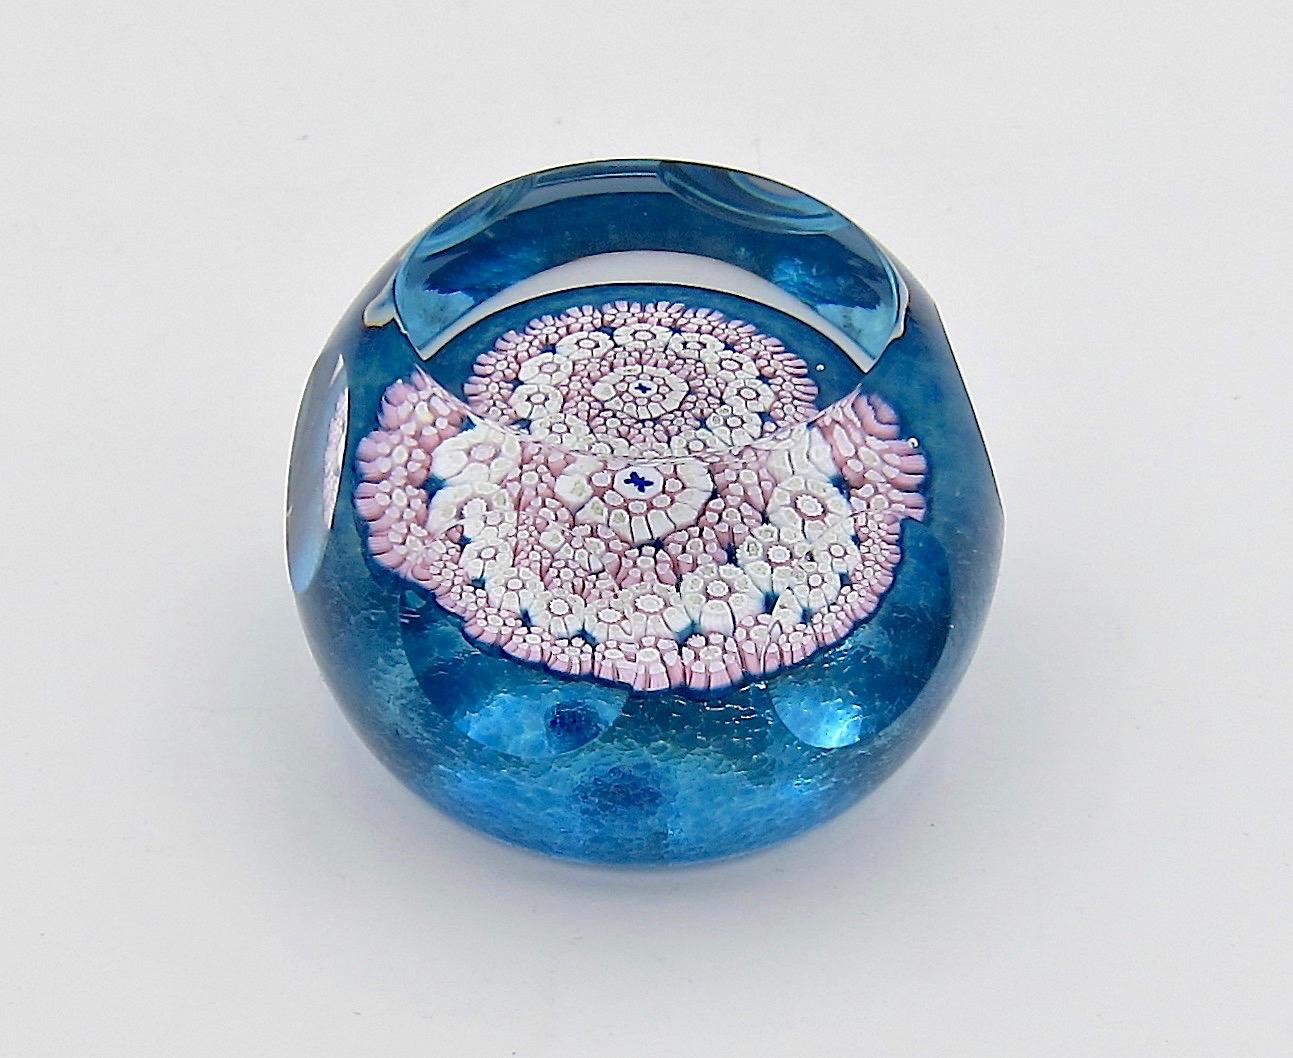 An English art glass paperweight, handcrafted in 1983 by Whitefriars Glass of London. Designed with concentric circles of millefiori canes in pastel pink and white with hints of green surrounding a central butterfly cane of cobalt blue on white. The